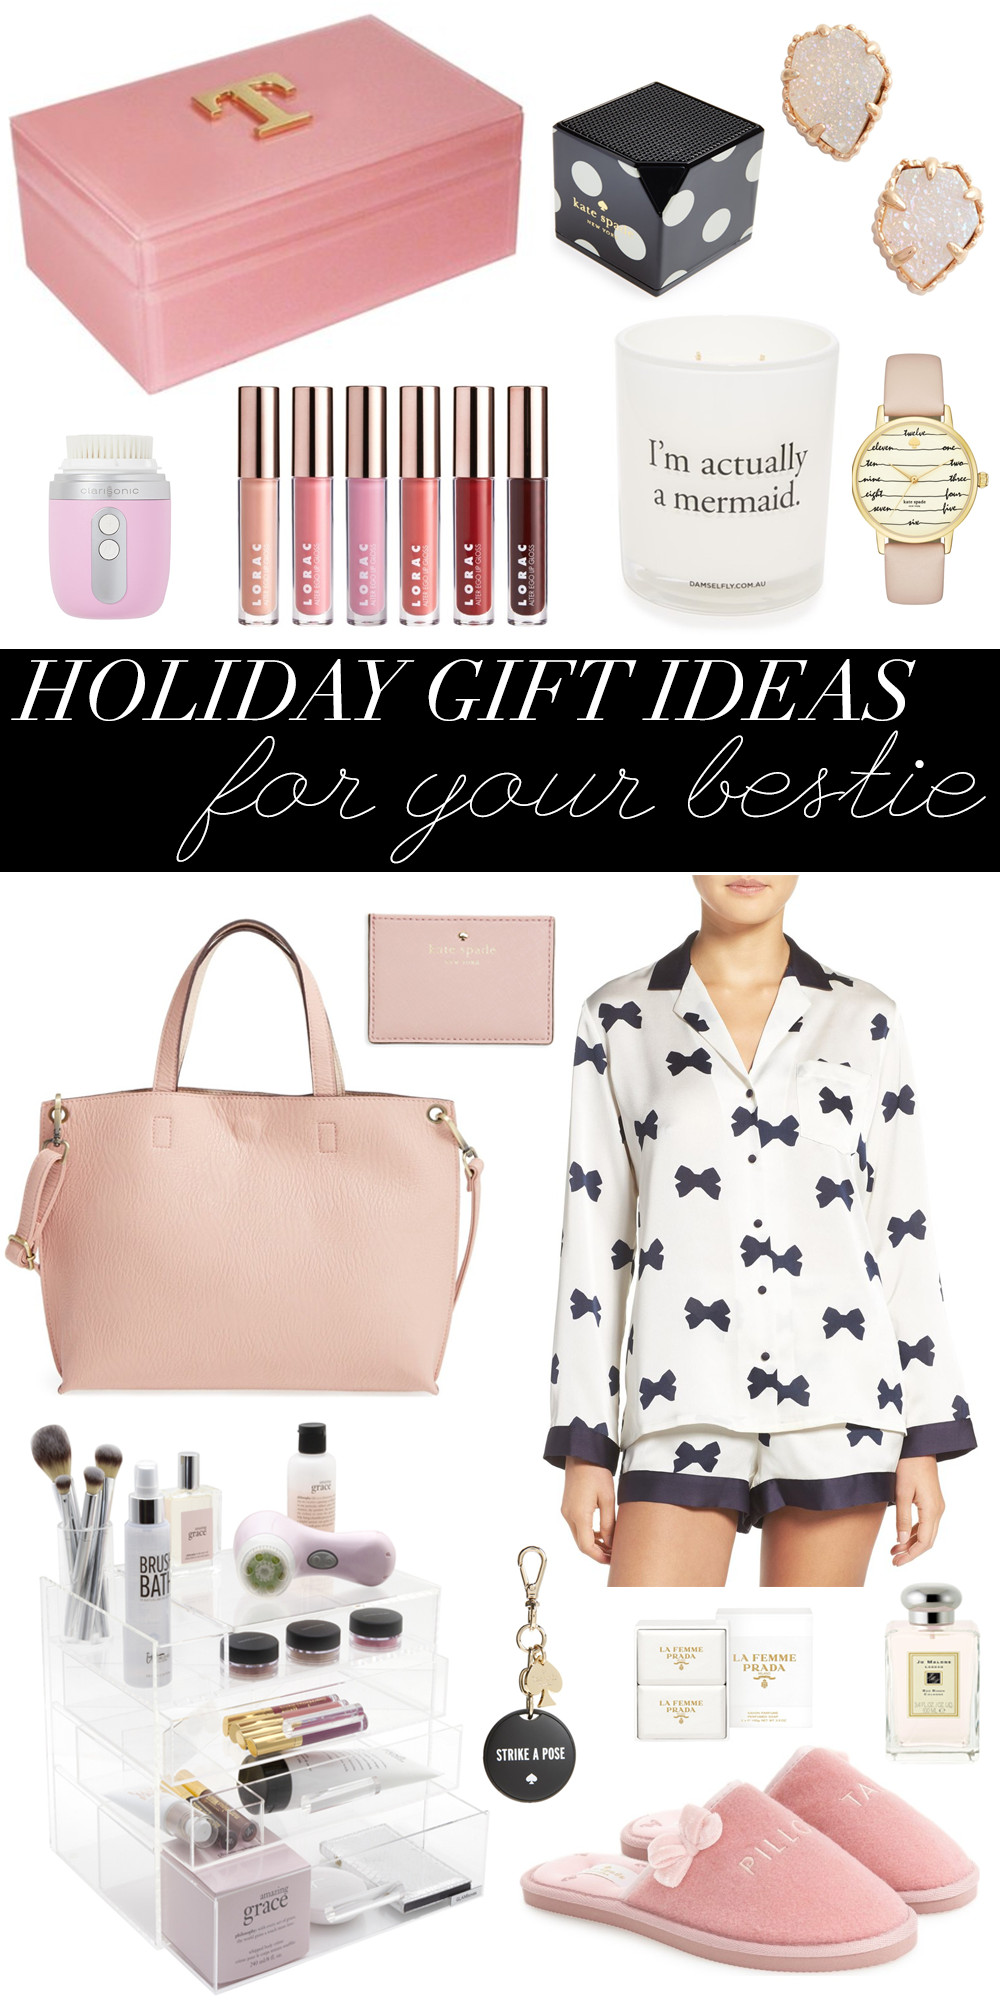 Gift Ideas For My Best Friend
 Holiday Gift Ideas For Your Best Friend Money Can Buy